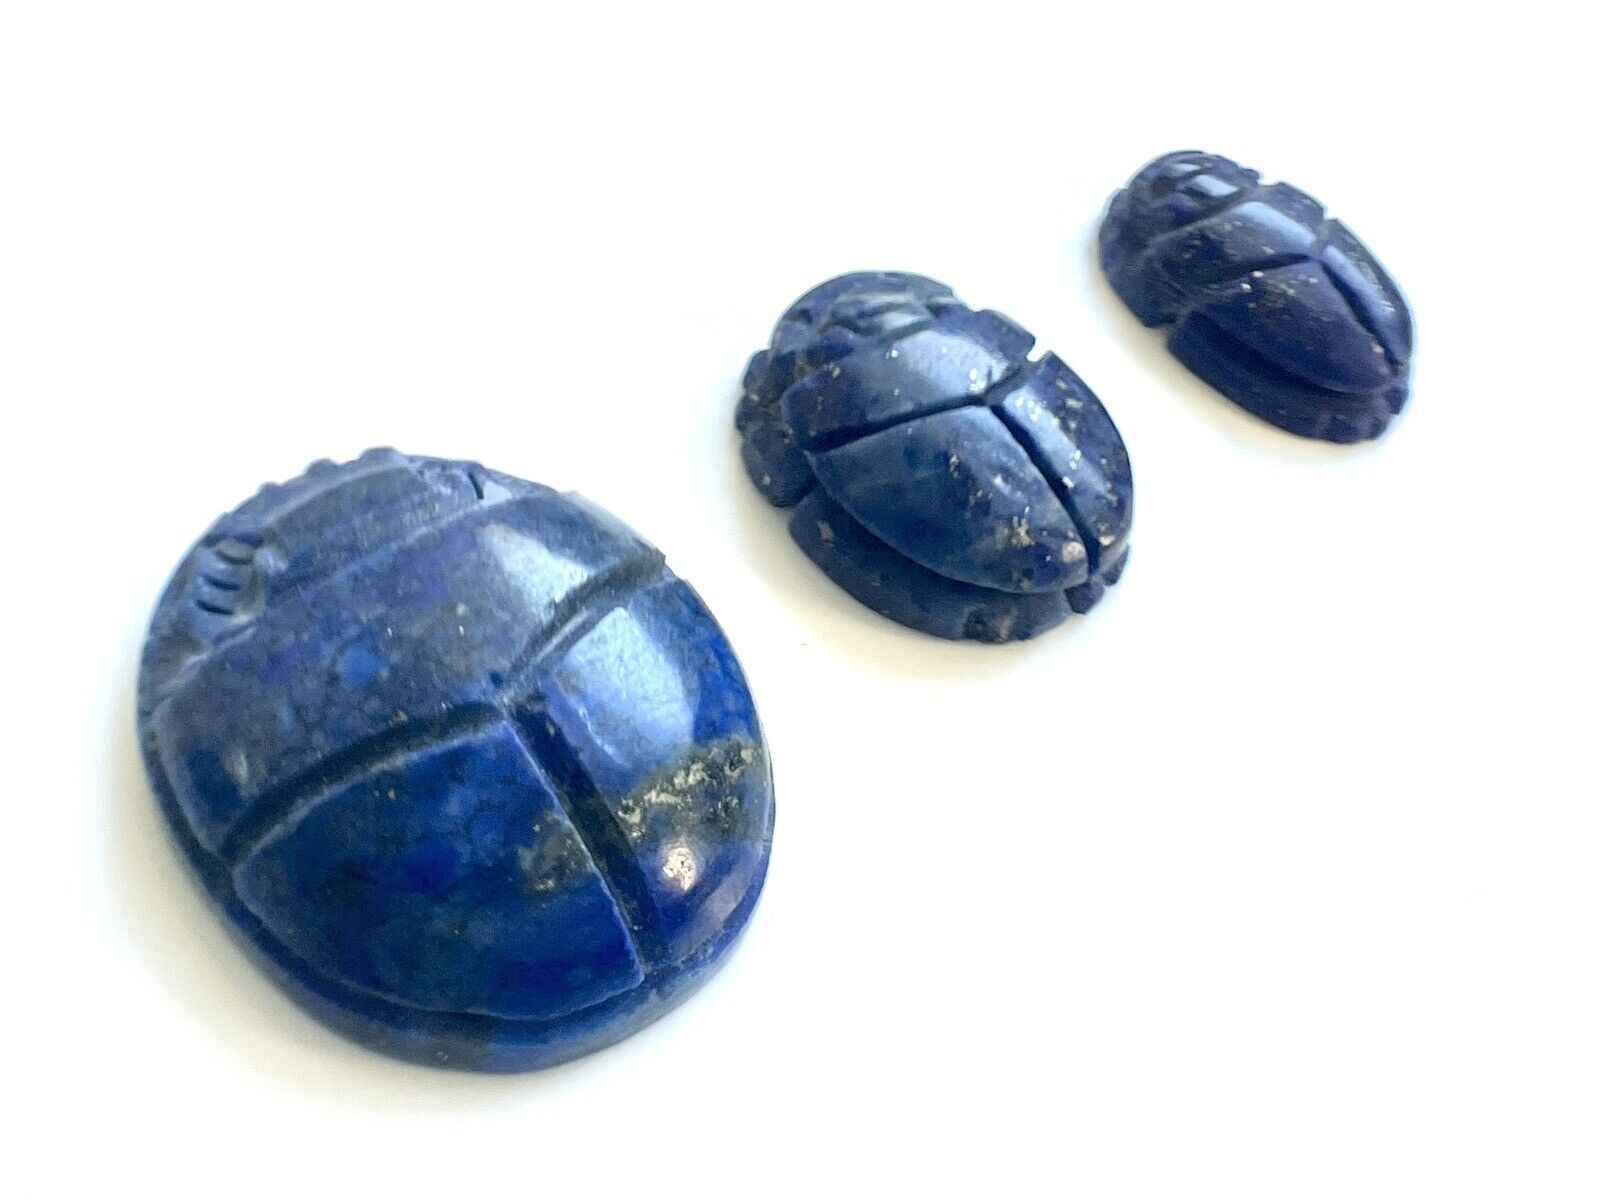 Lot Of 3 Vintage Ancient Egyptian Hand-carved Lapis Lazuli Stone Scarab Beetle